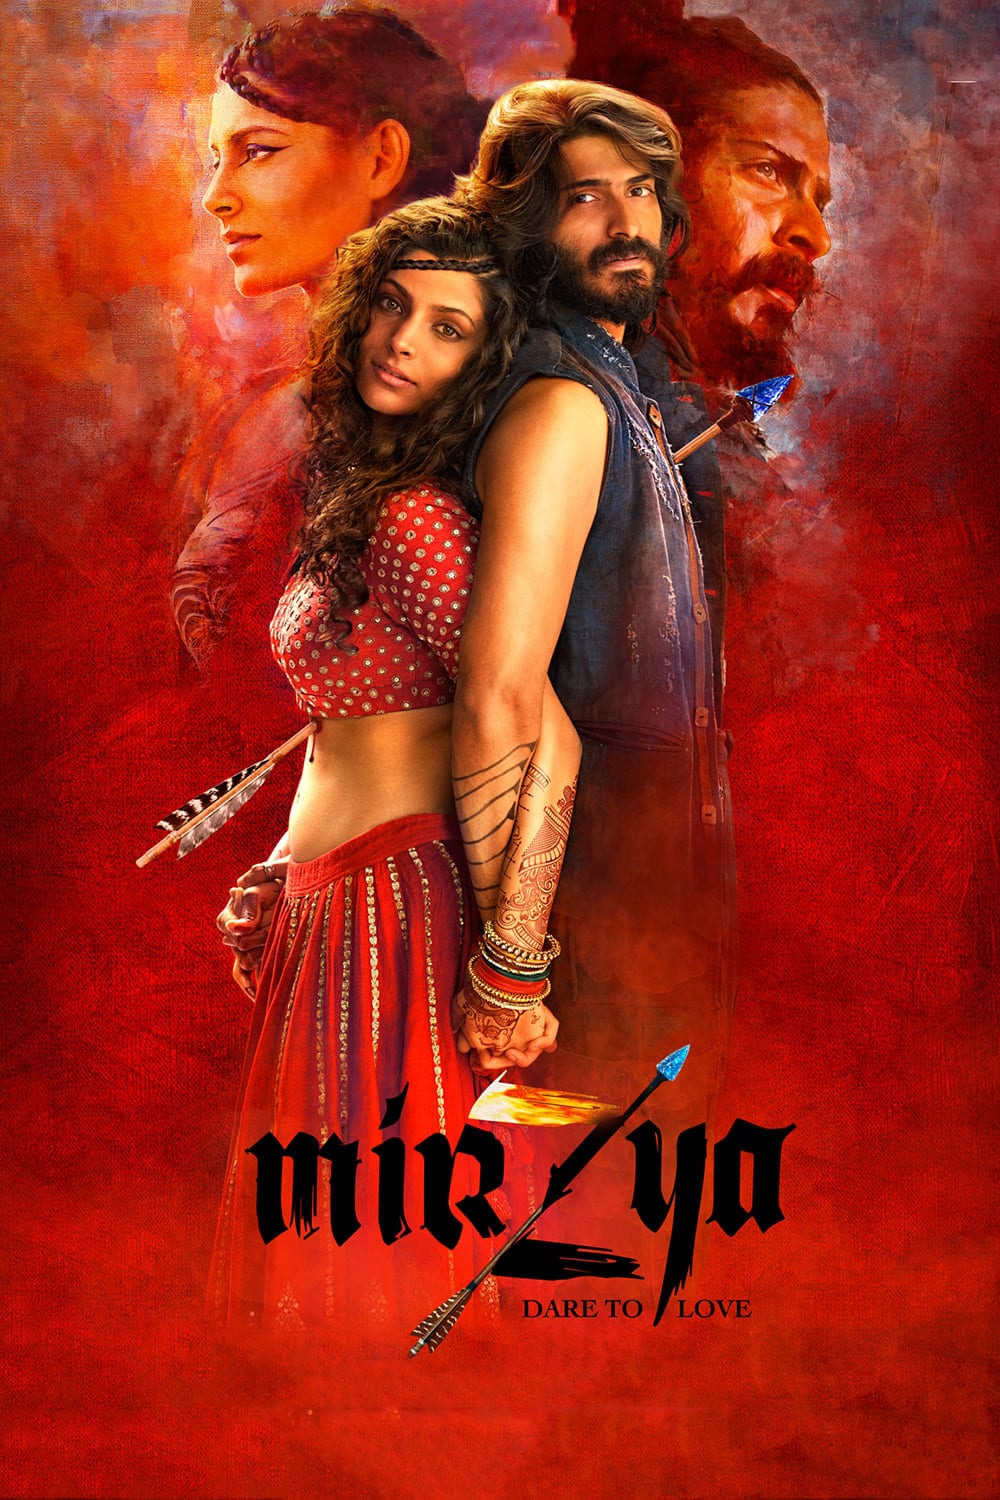 Poster for the movie "Mirzya"